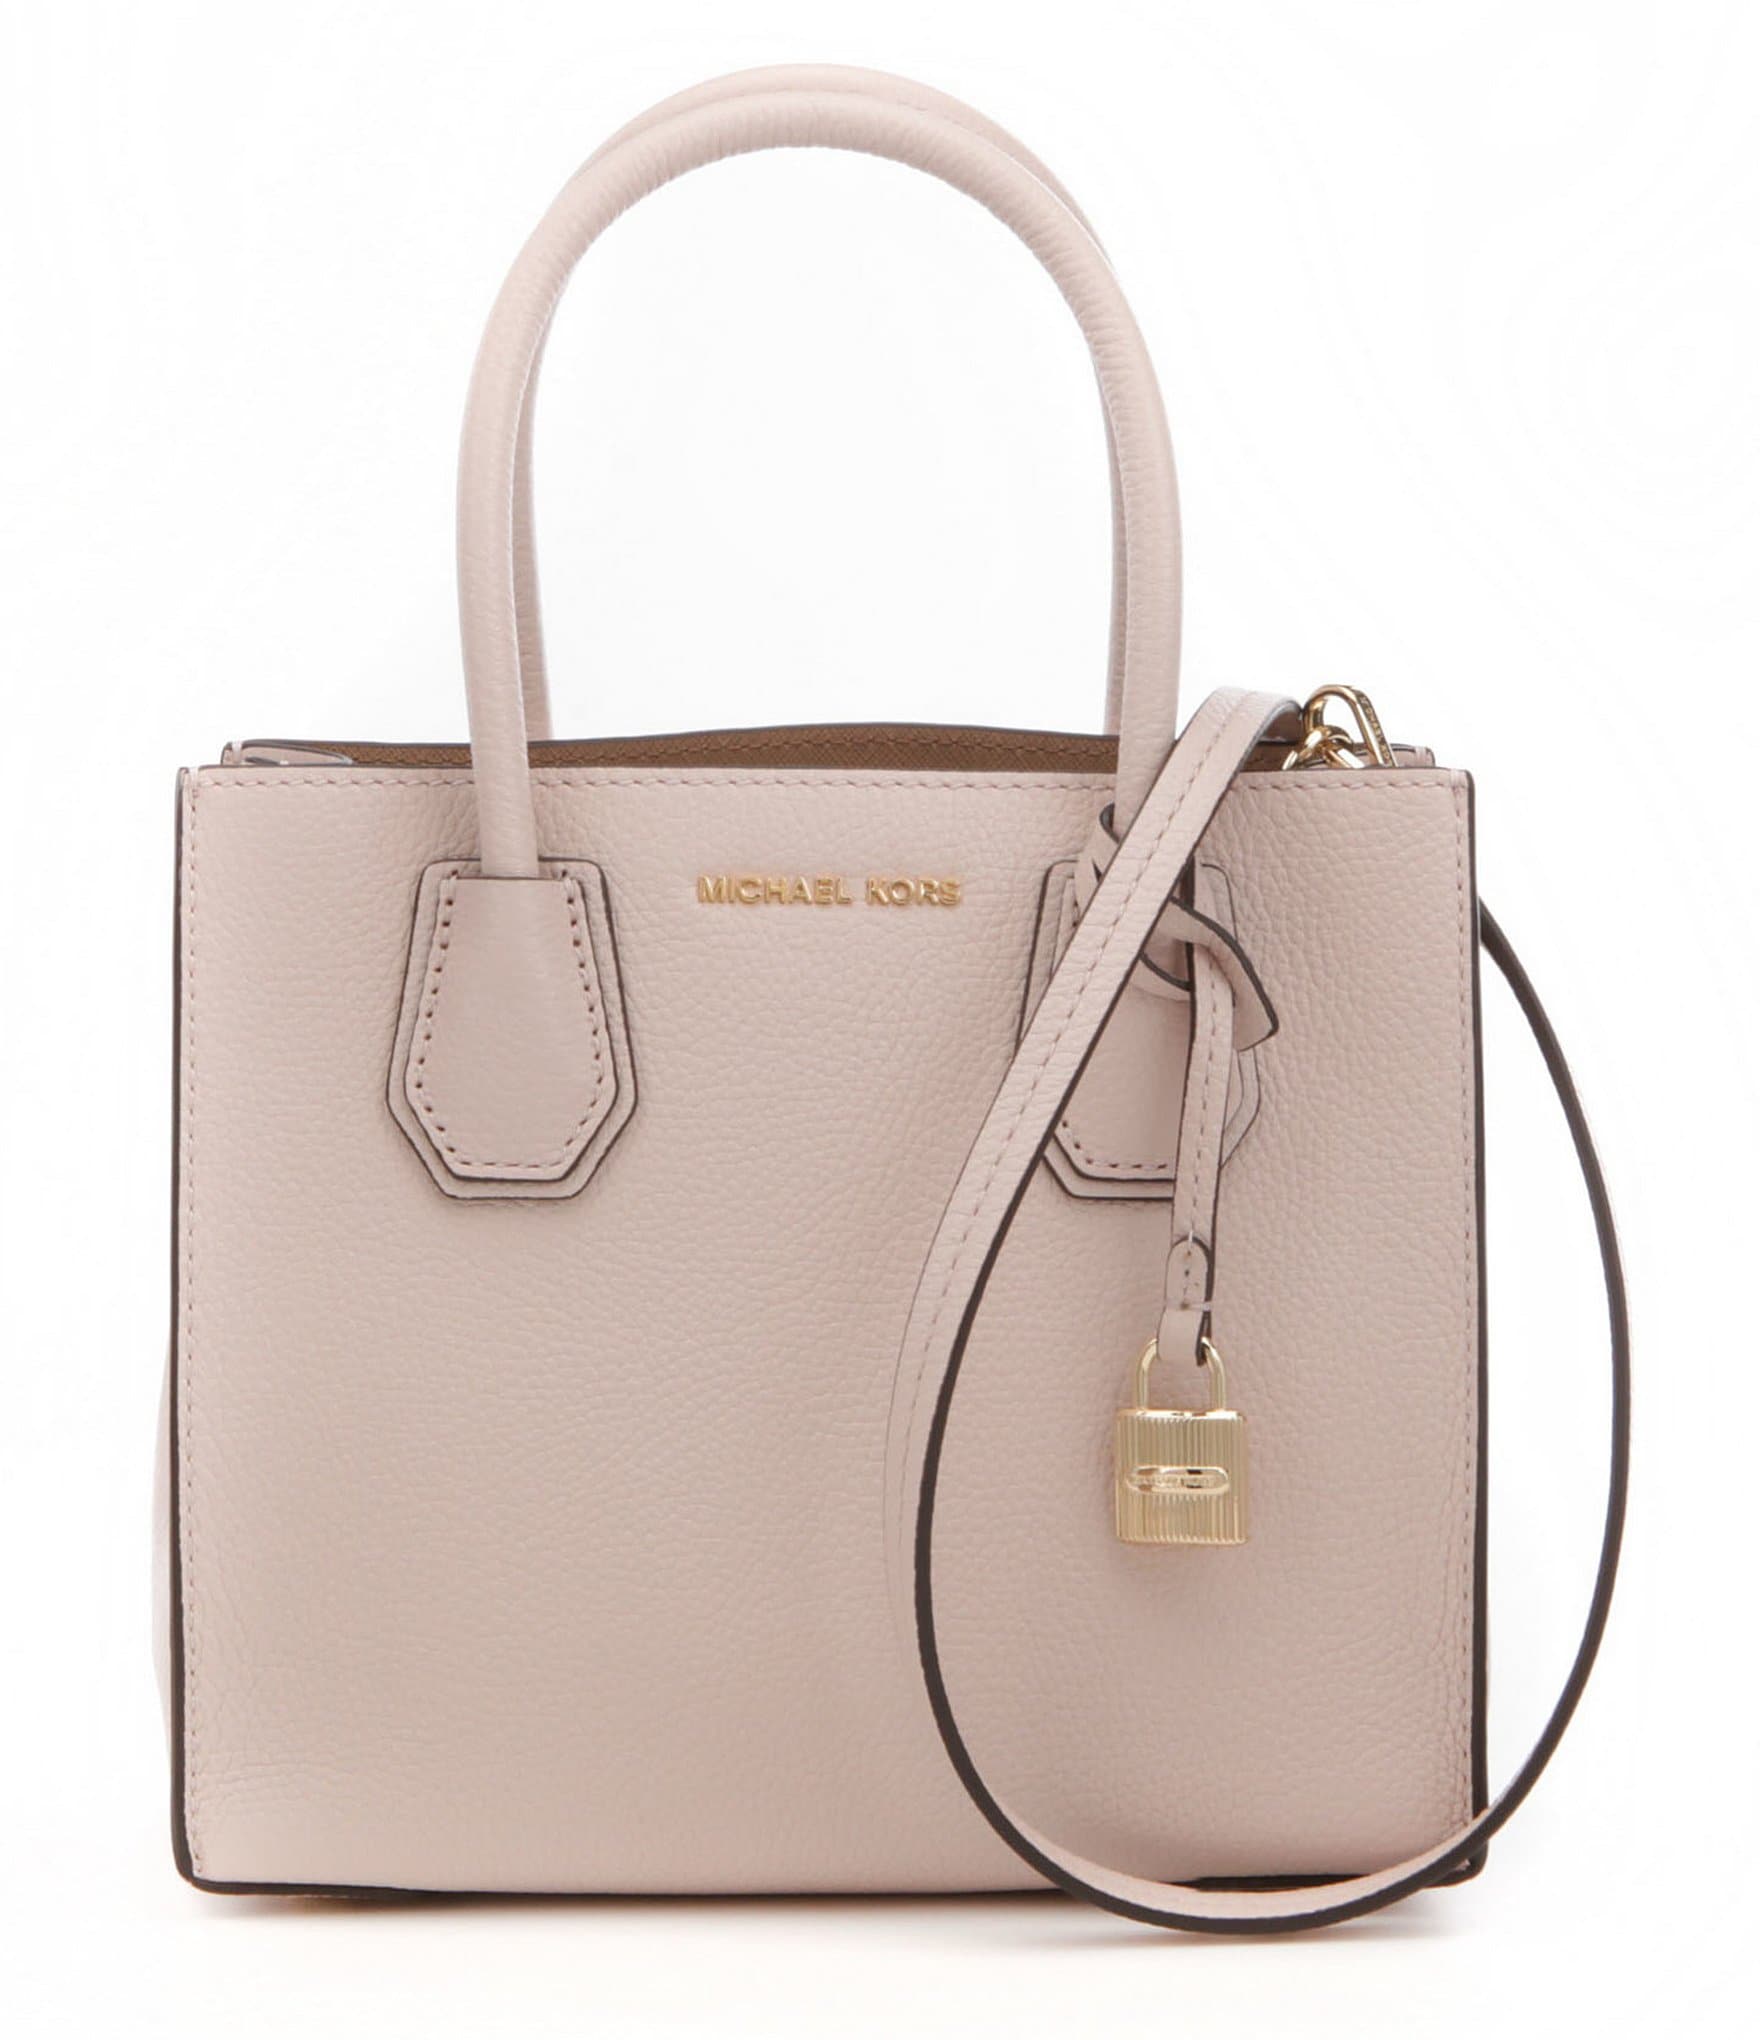 Dillards Michael Kors Purse Sale | Confederated Tribes of the Umatilla Indian Reservation